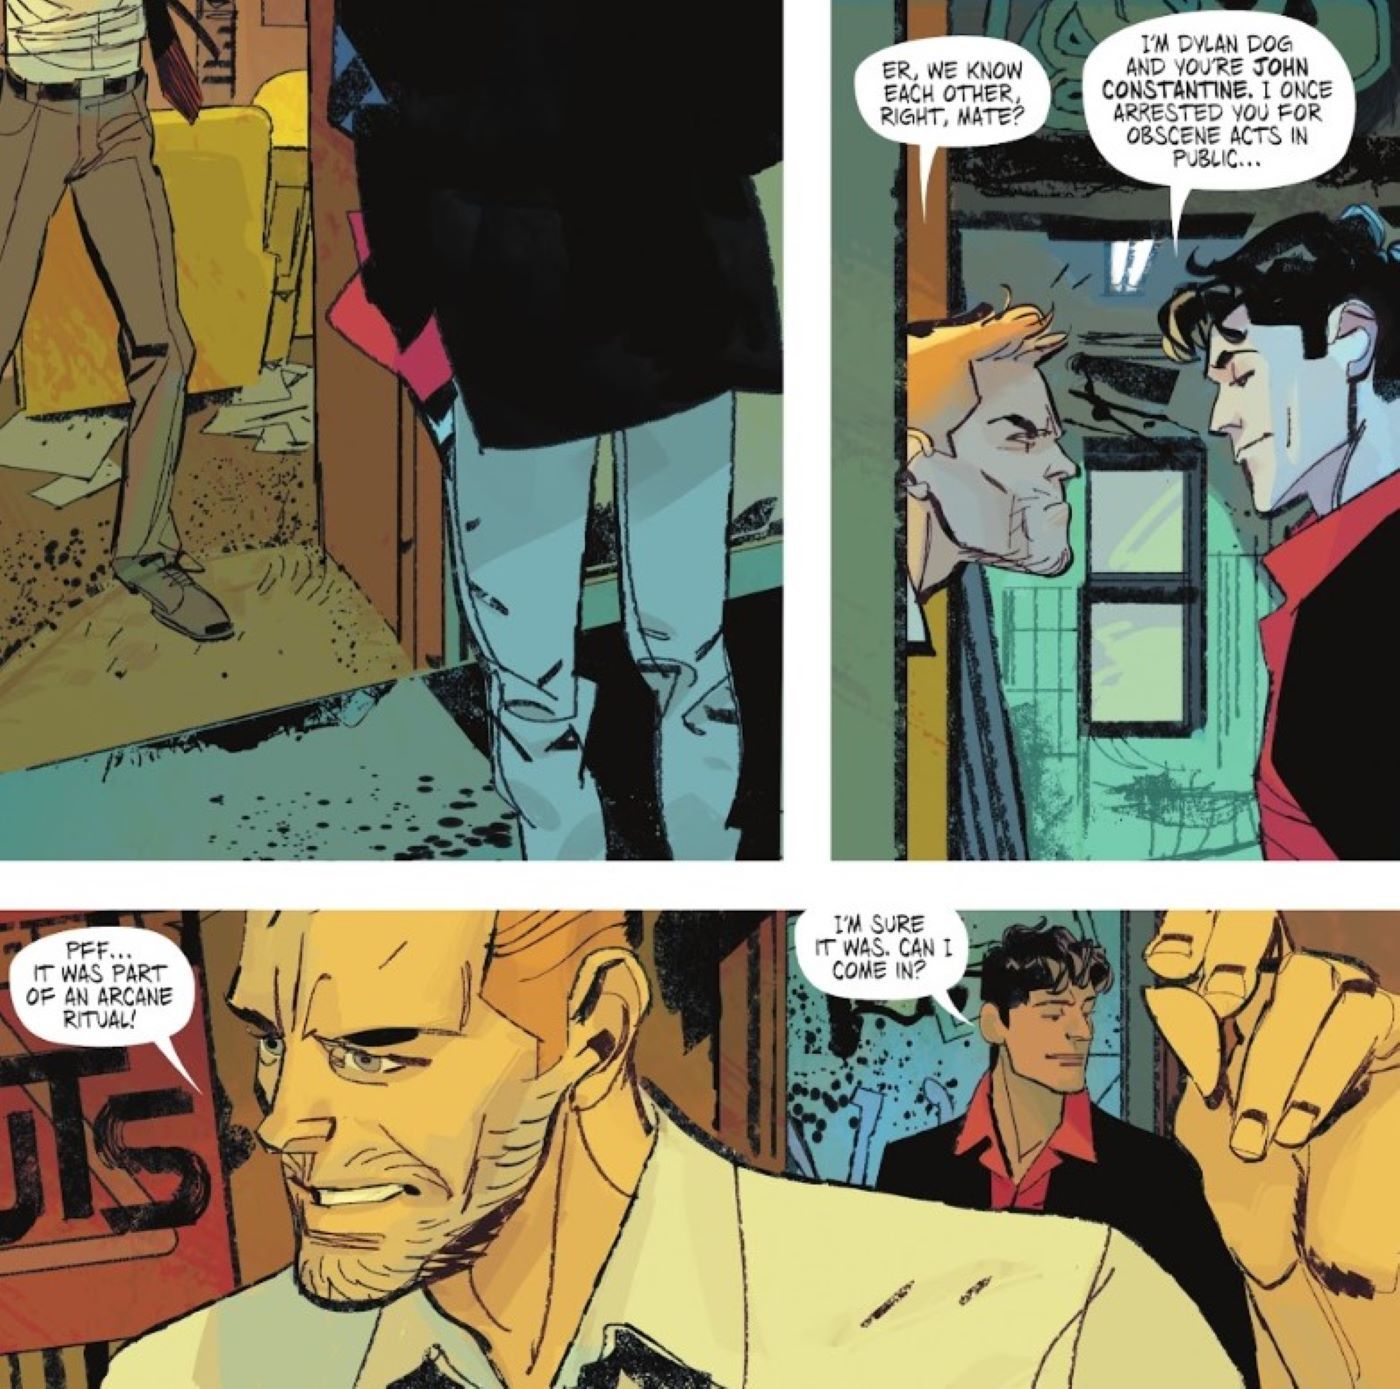 Batman Dylan Dog #2 featuring John Constantine and Dylan Dog